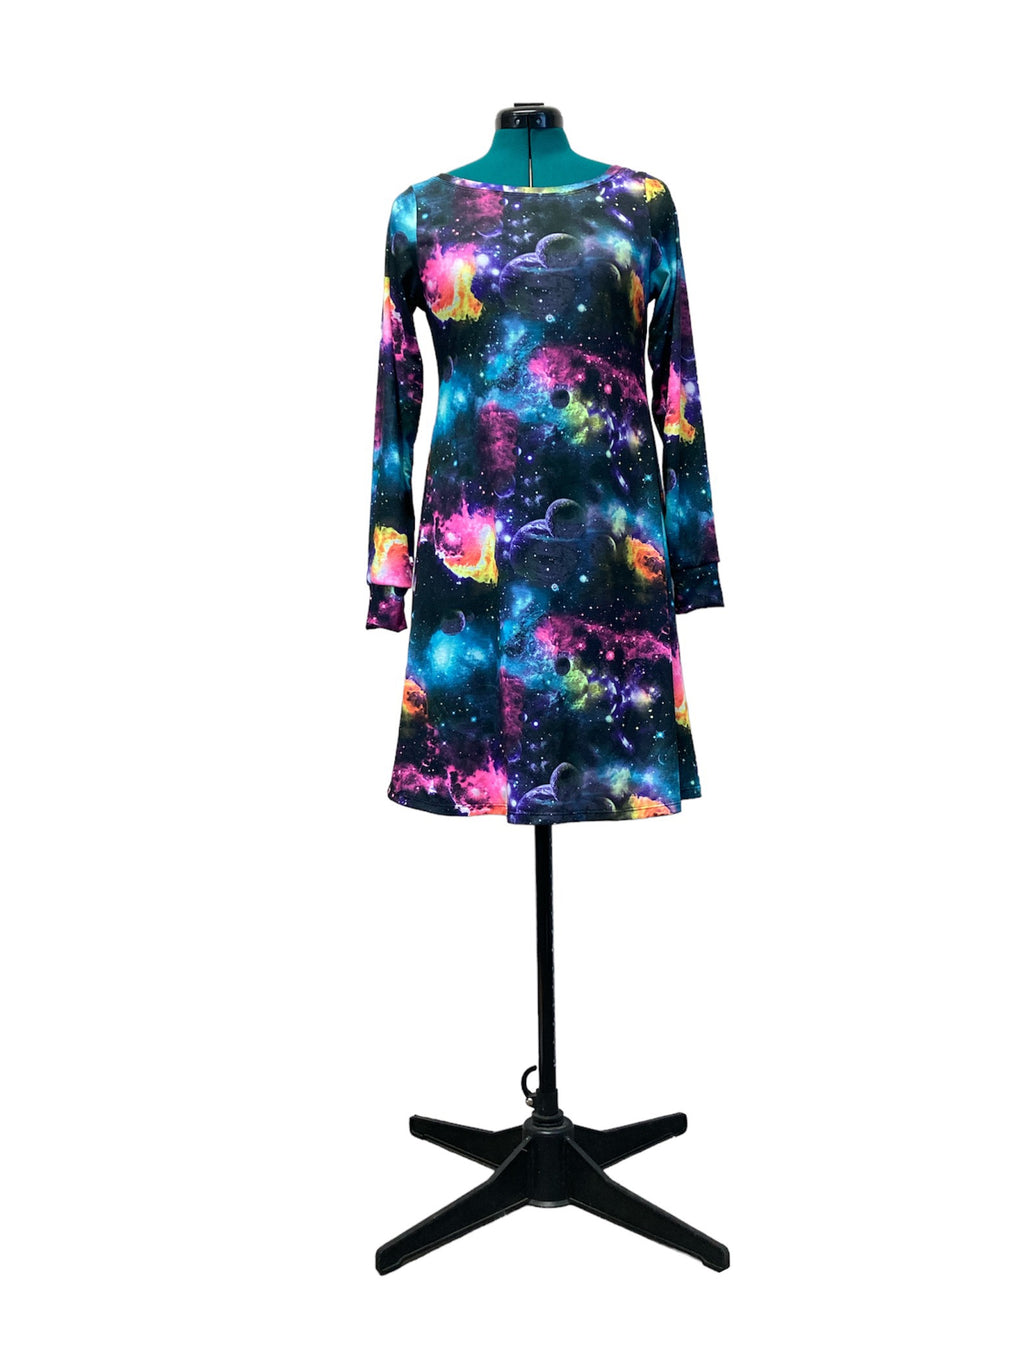 Ladies A-Line Dress in Galaxy Jersey Size 6